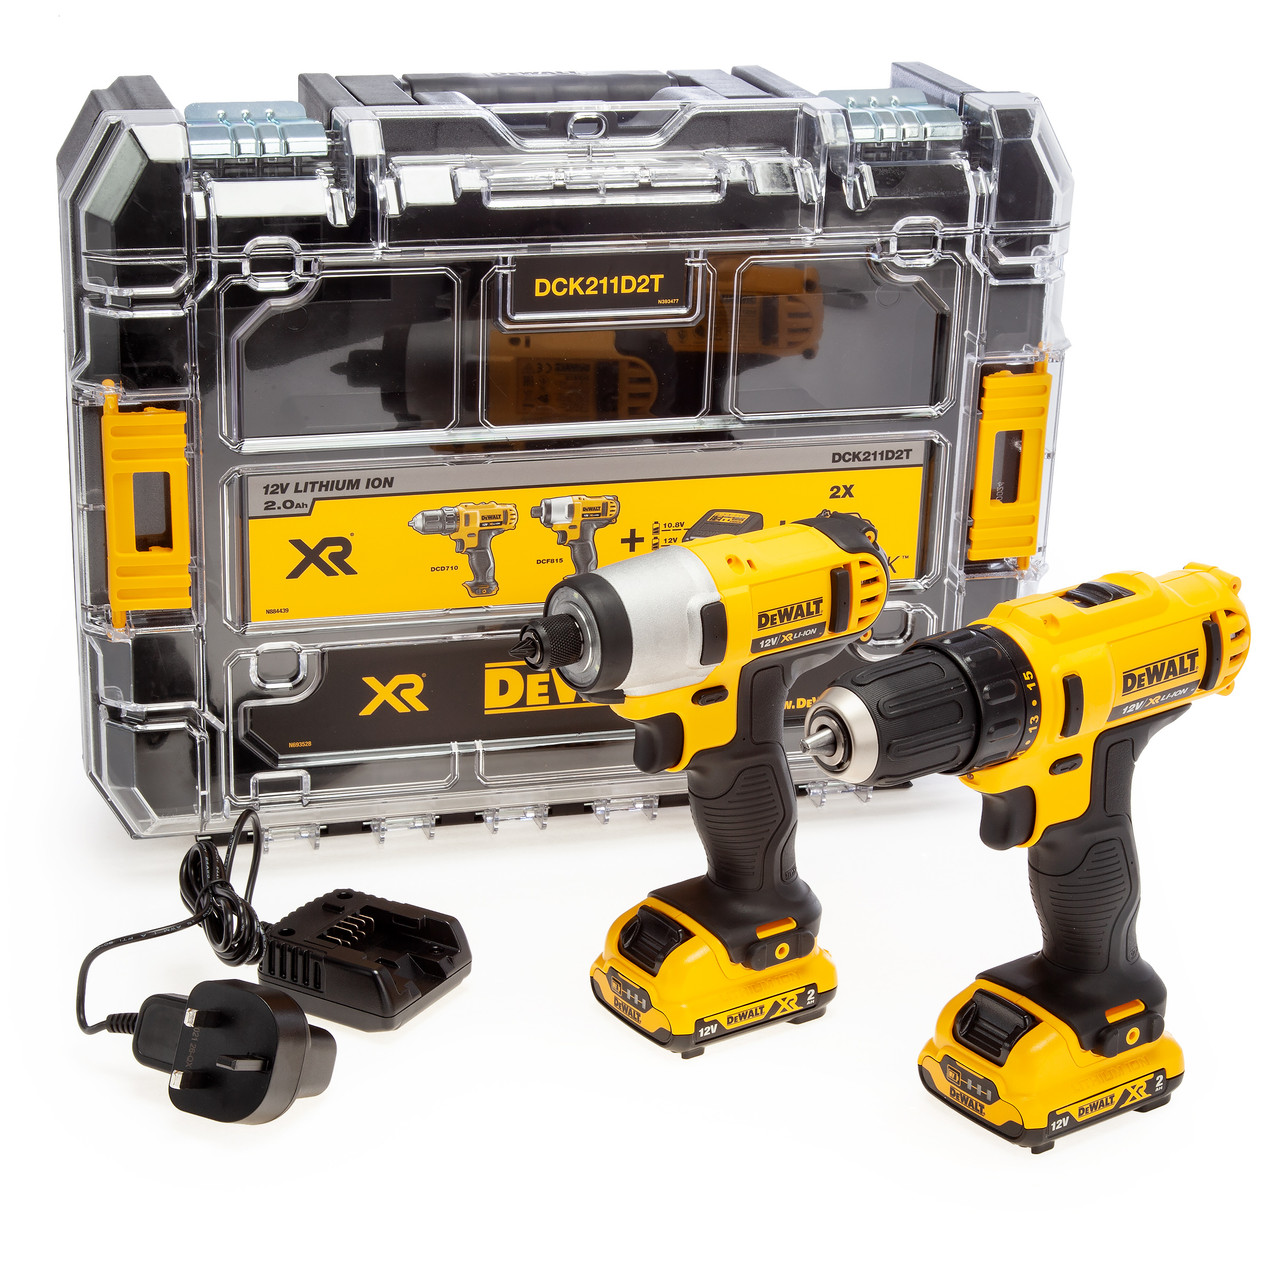 Dewalt DCK211D2T 12V Cordless Compact Drill Driver and Impact Driver from Toolstop